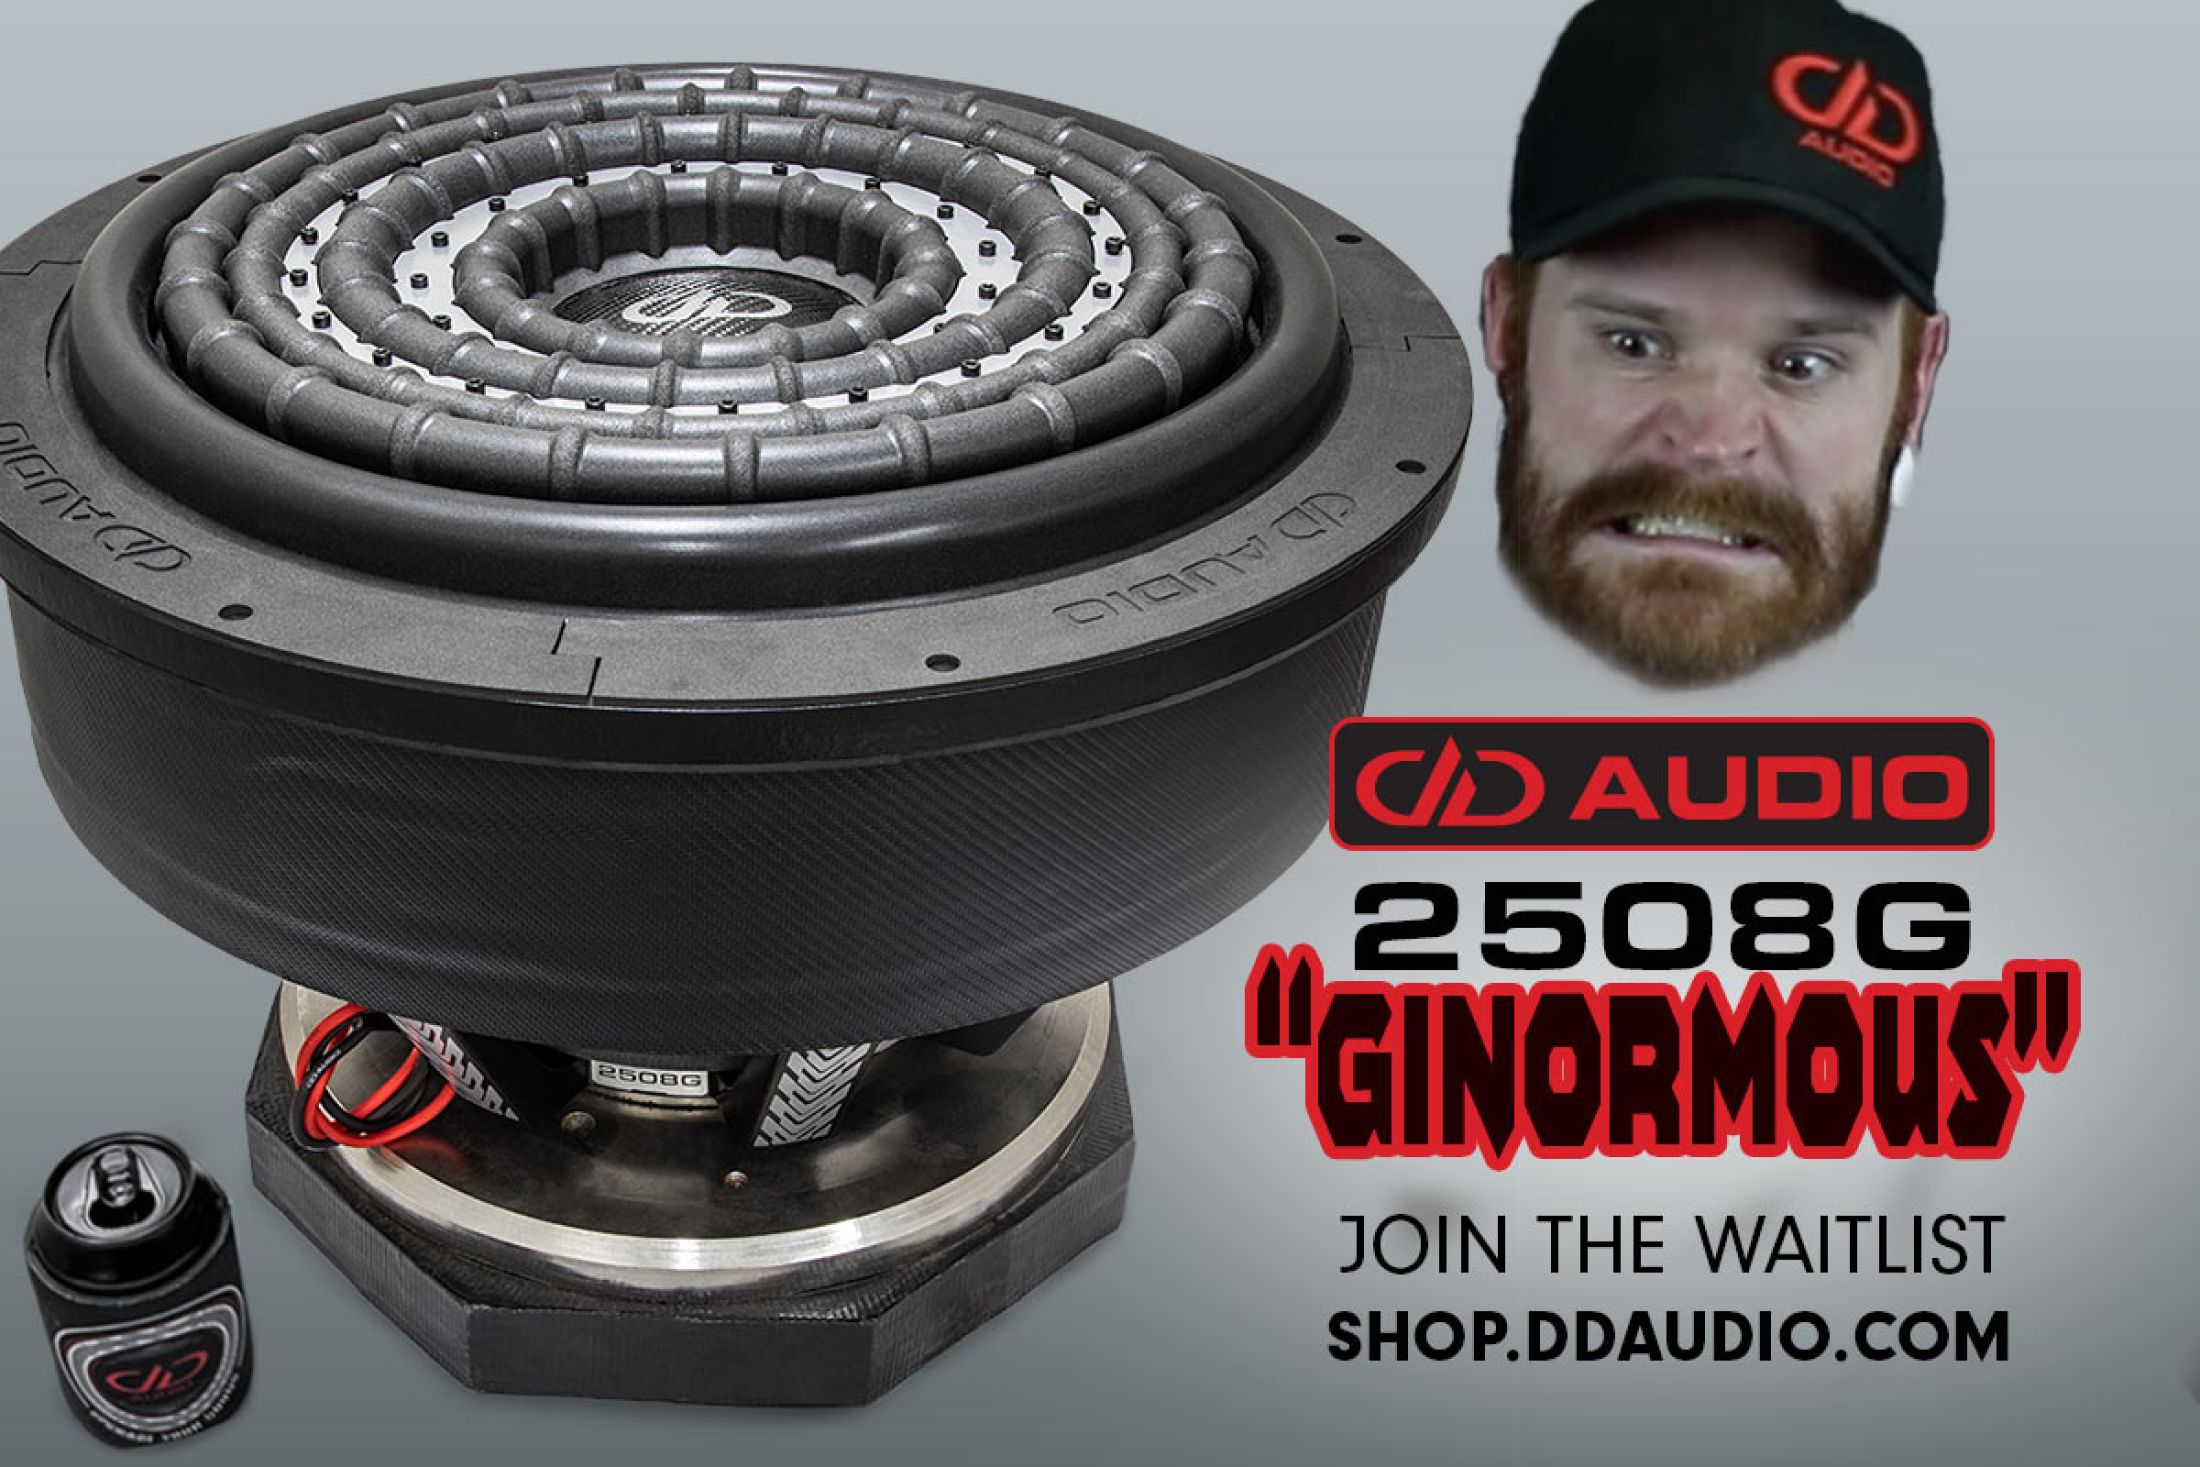 Cover Photo showing 2508 with koozie for scale, Jake's freaked out face, the DD Logo, and model, "Ginormous" and " Join the Waiting List - shop.ddaudio.com"